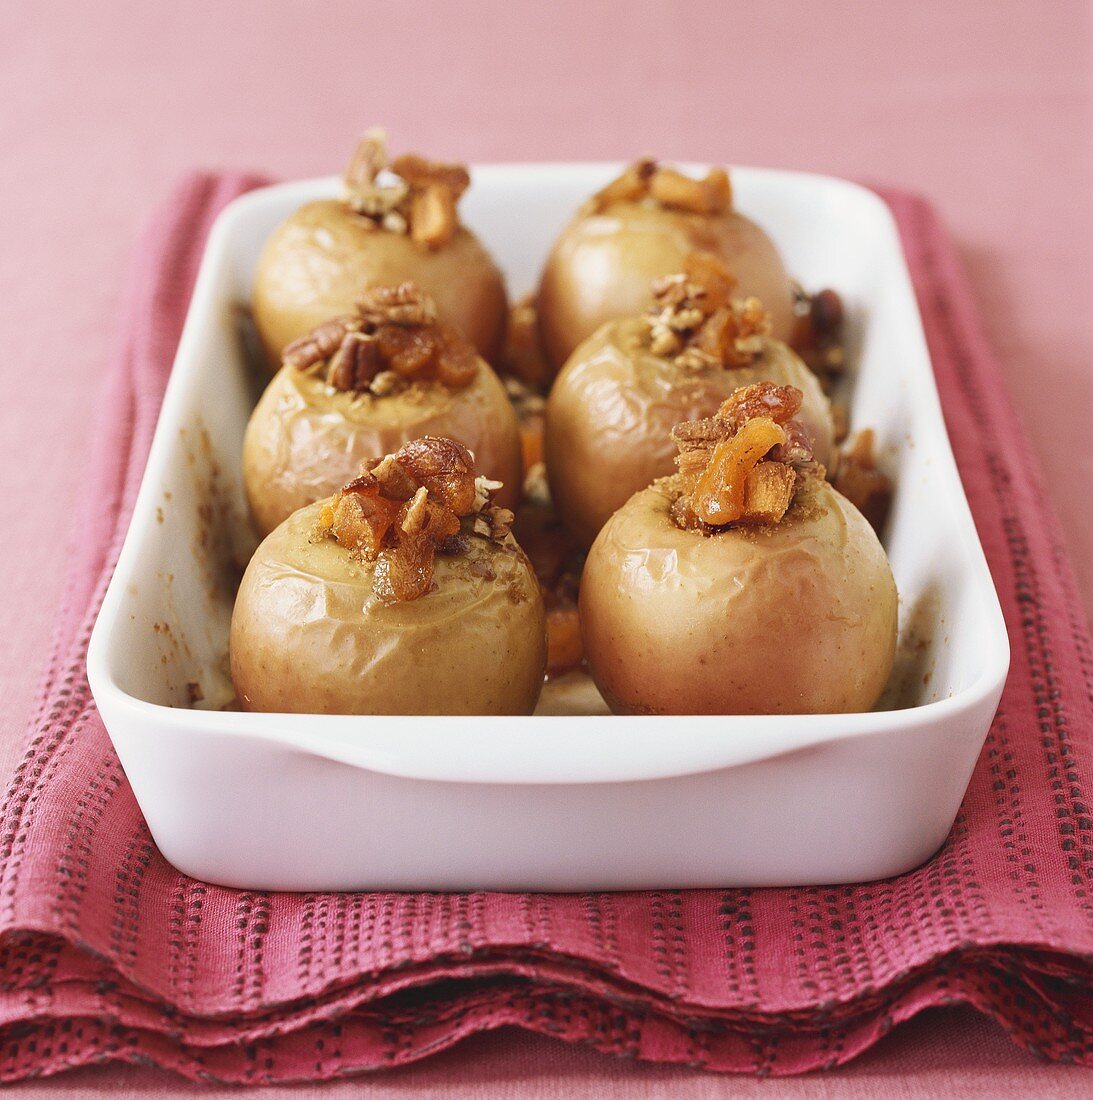 Baked apples with nut and apricot stuffing